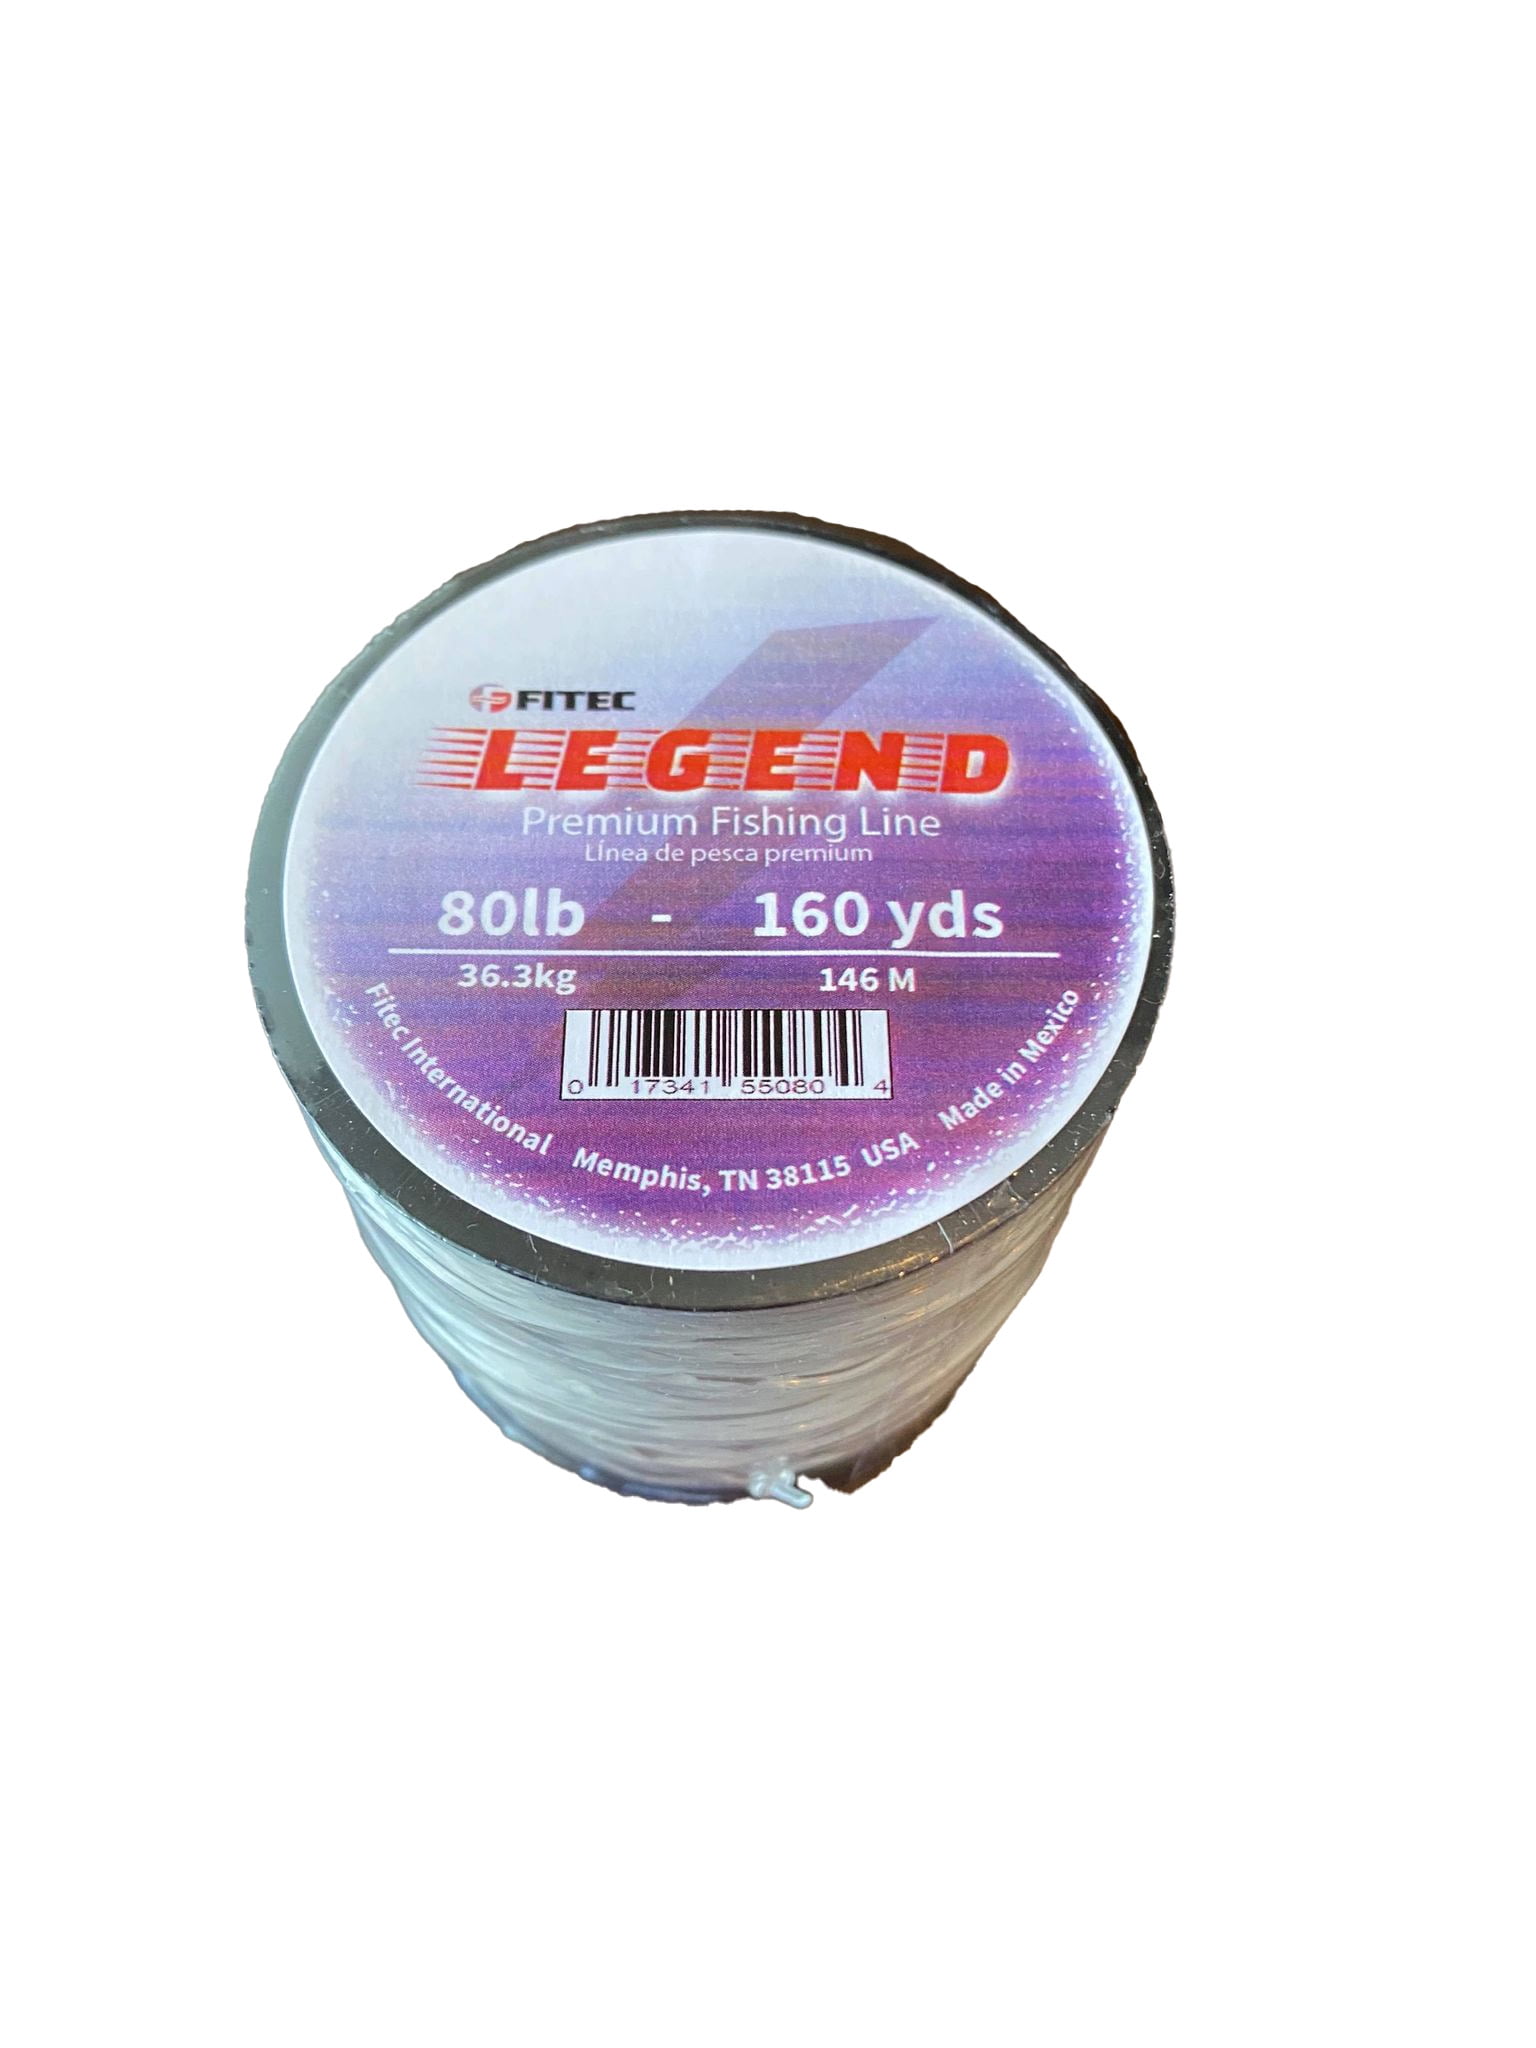 Lee Fisher Joy Fish Spool Monofilament Fishing Line 100 LB Clear 780980221359 for sale online 